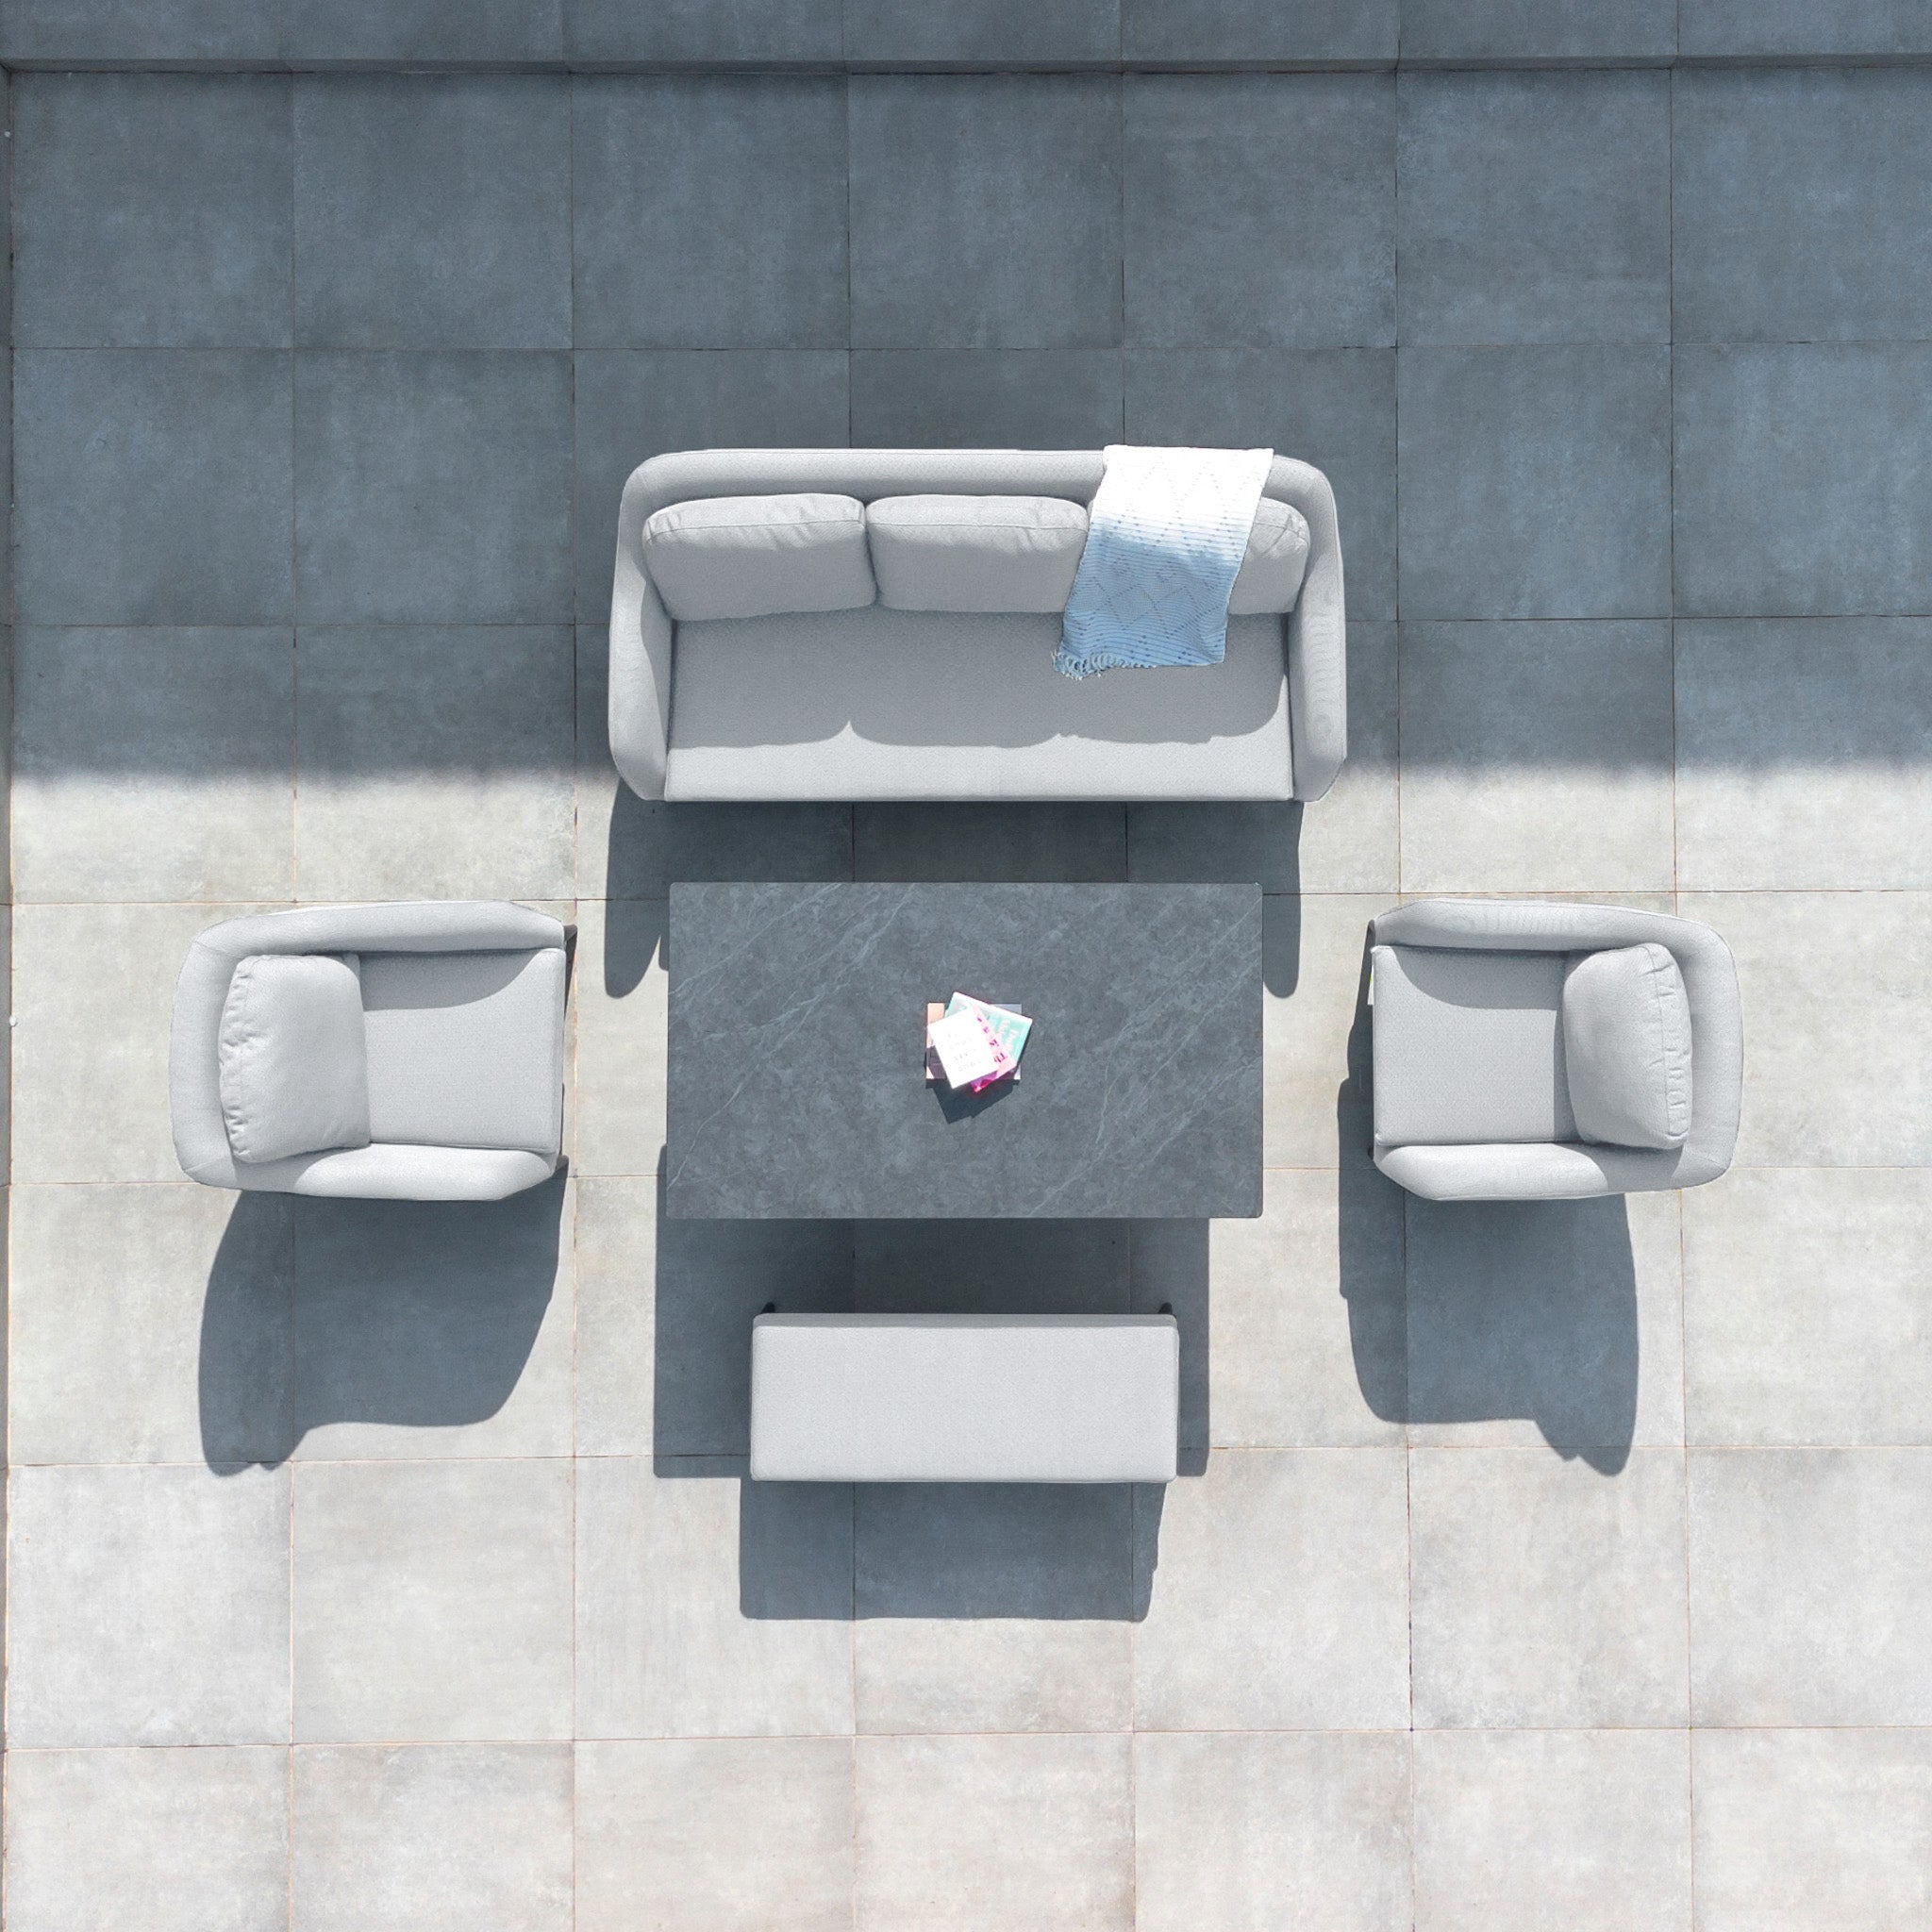 Luna 3 Seat Outdoor Fabric Sofa Set with Rising Table in Oyster Grey